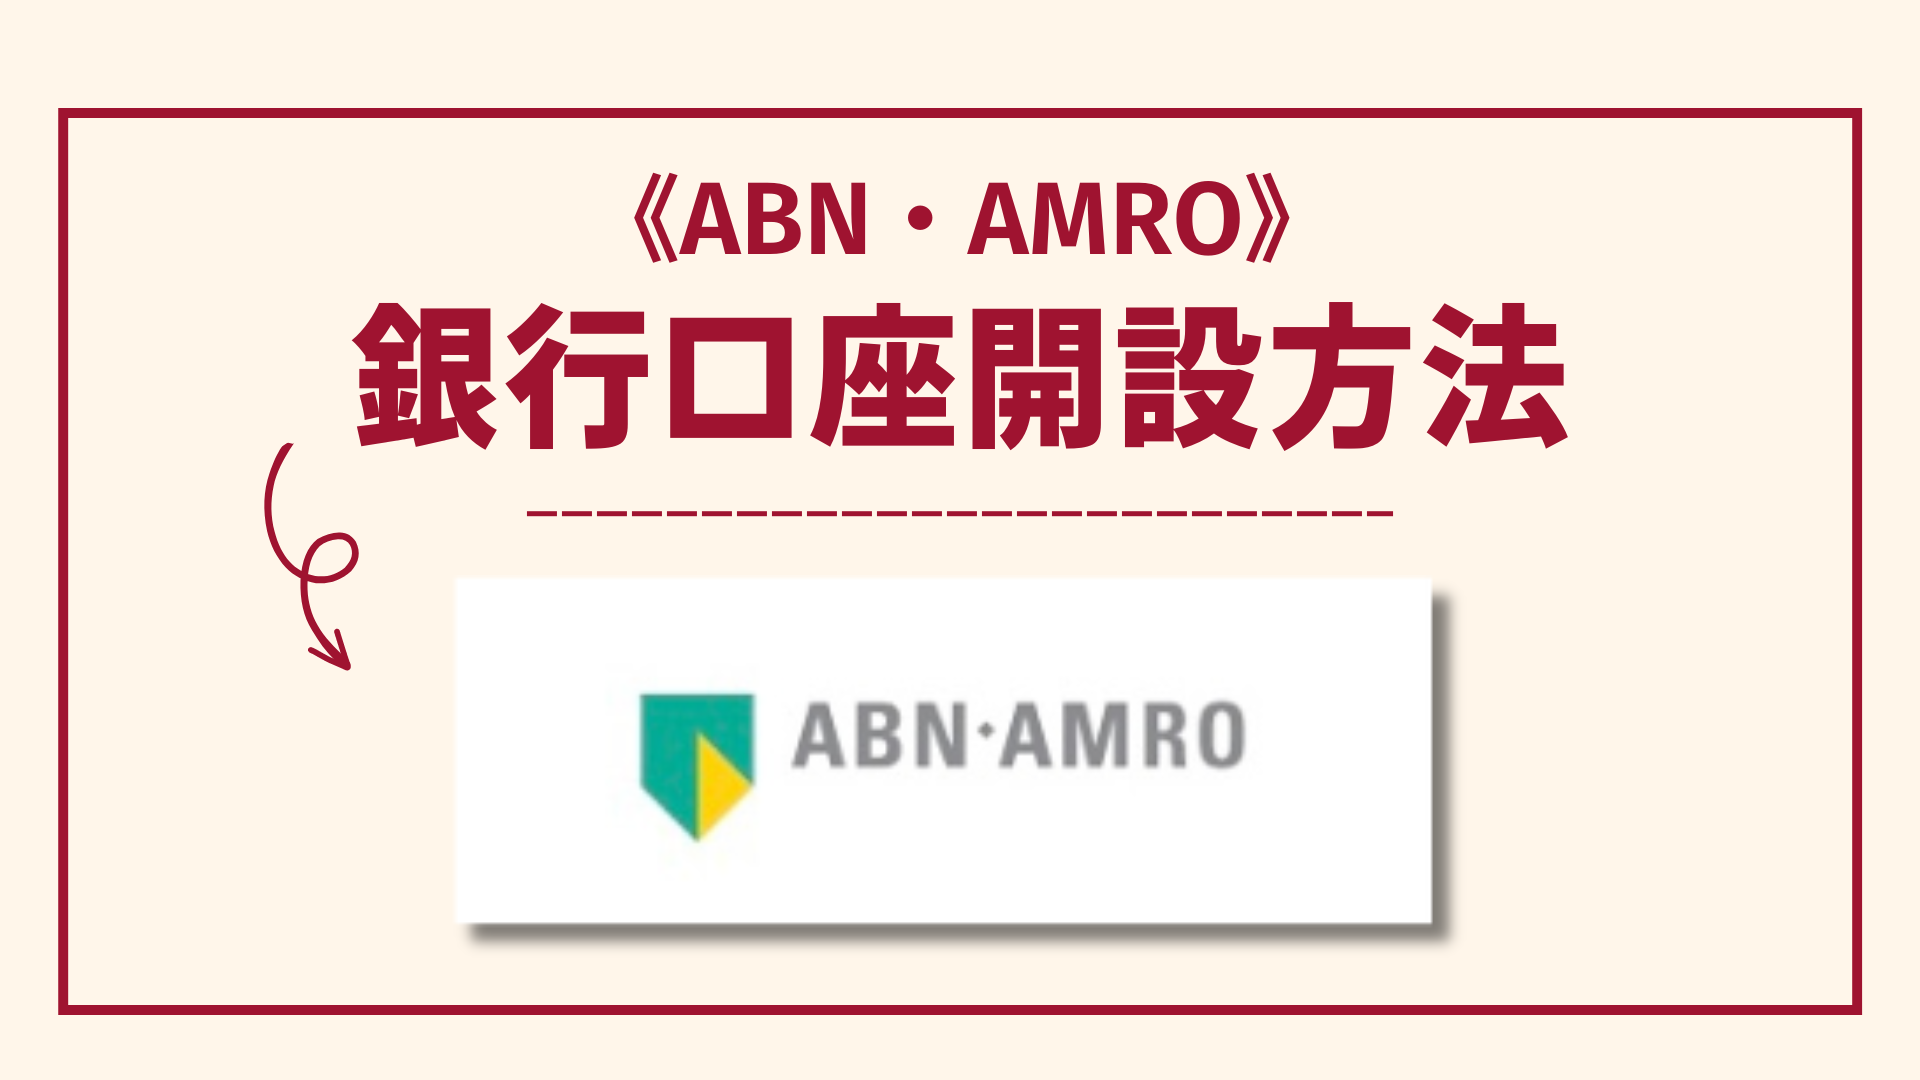 how to open ABN・AMRO bank account